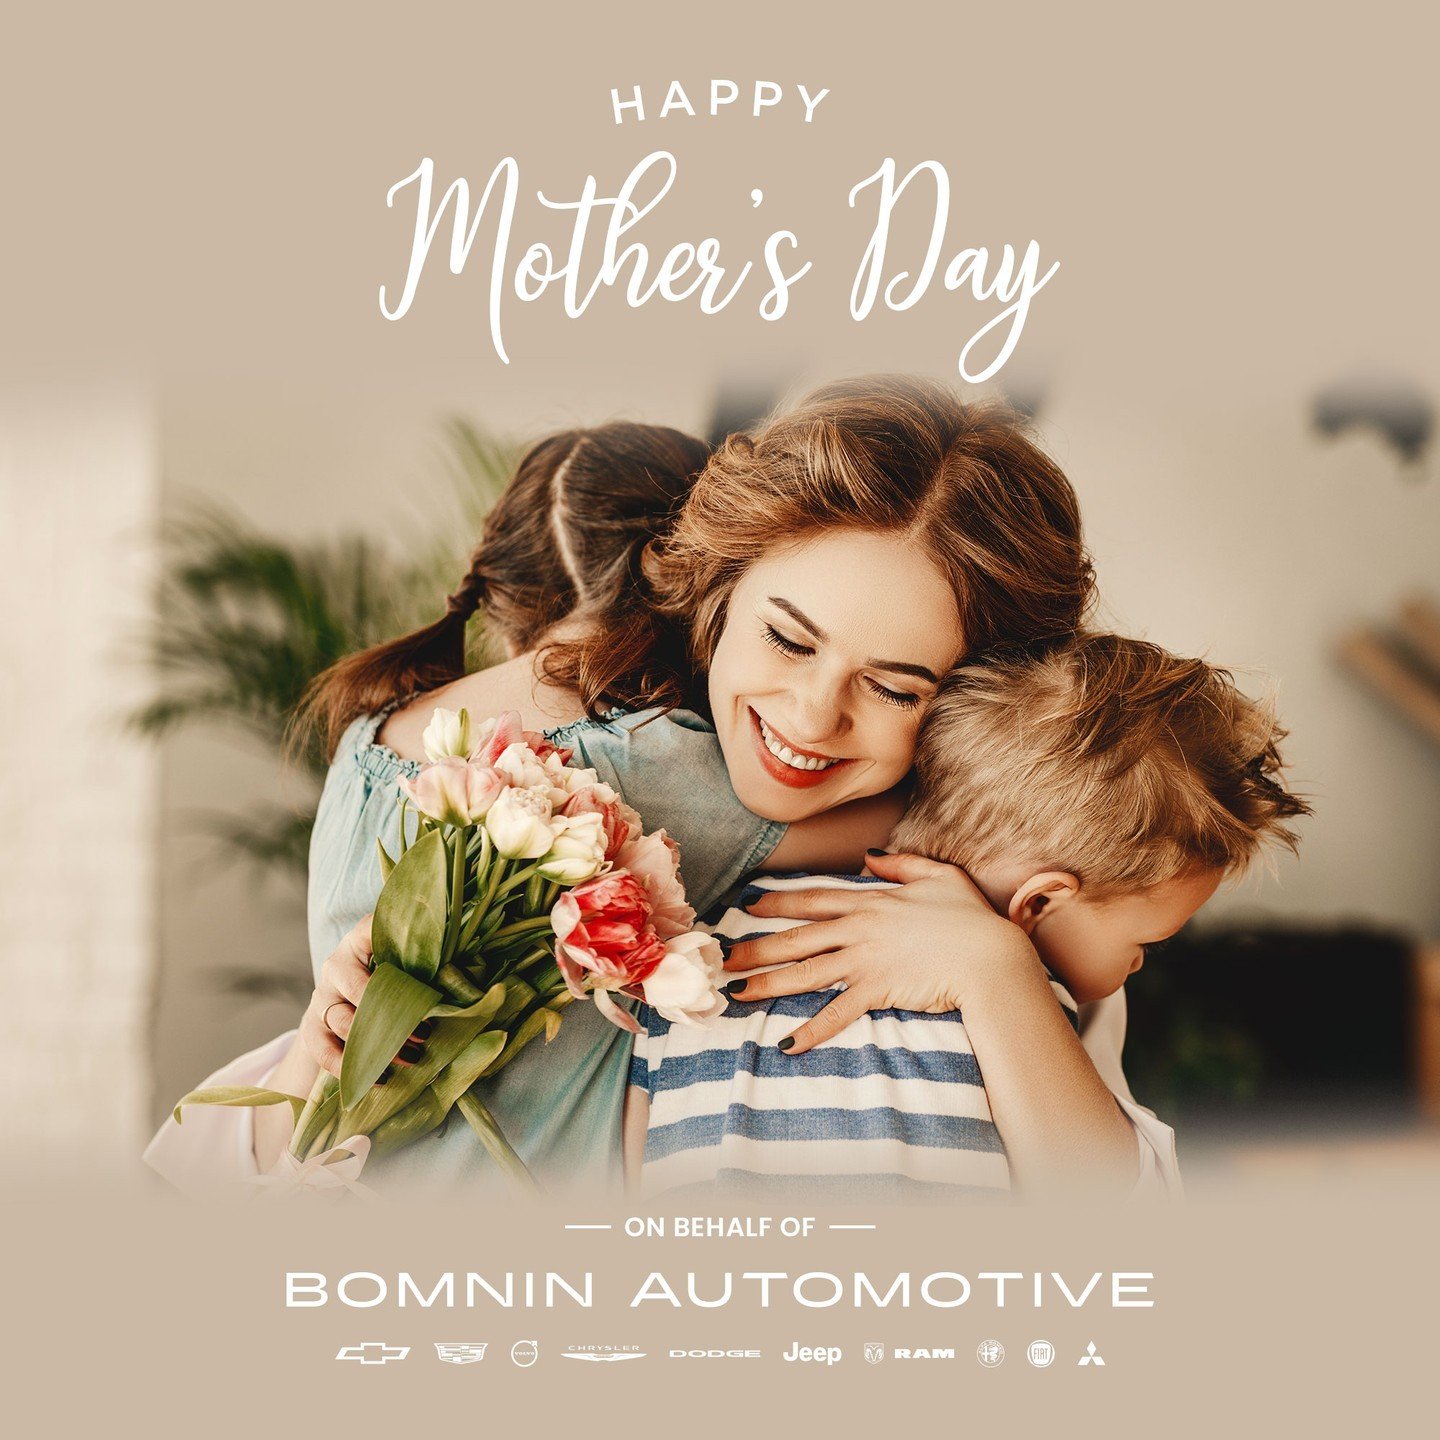 Happy Mother's Day to all the amazing moms out there! 💐 Today, we celebrate your love, strength, and endless dedication. 

Wishing you a day filled with joy, laughter, and cherished moments with your loved ones. From all of us at Bomnin Automotive, 